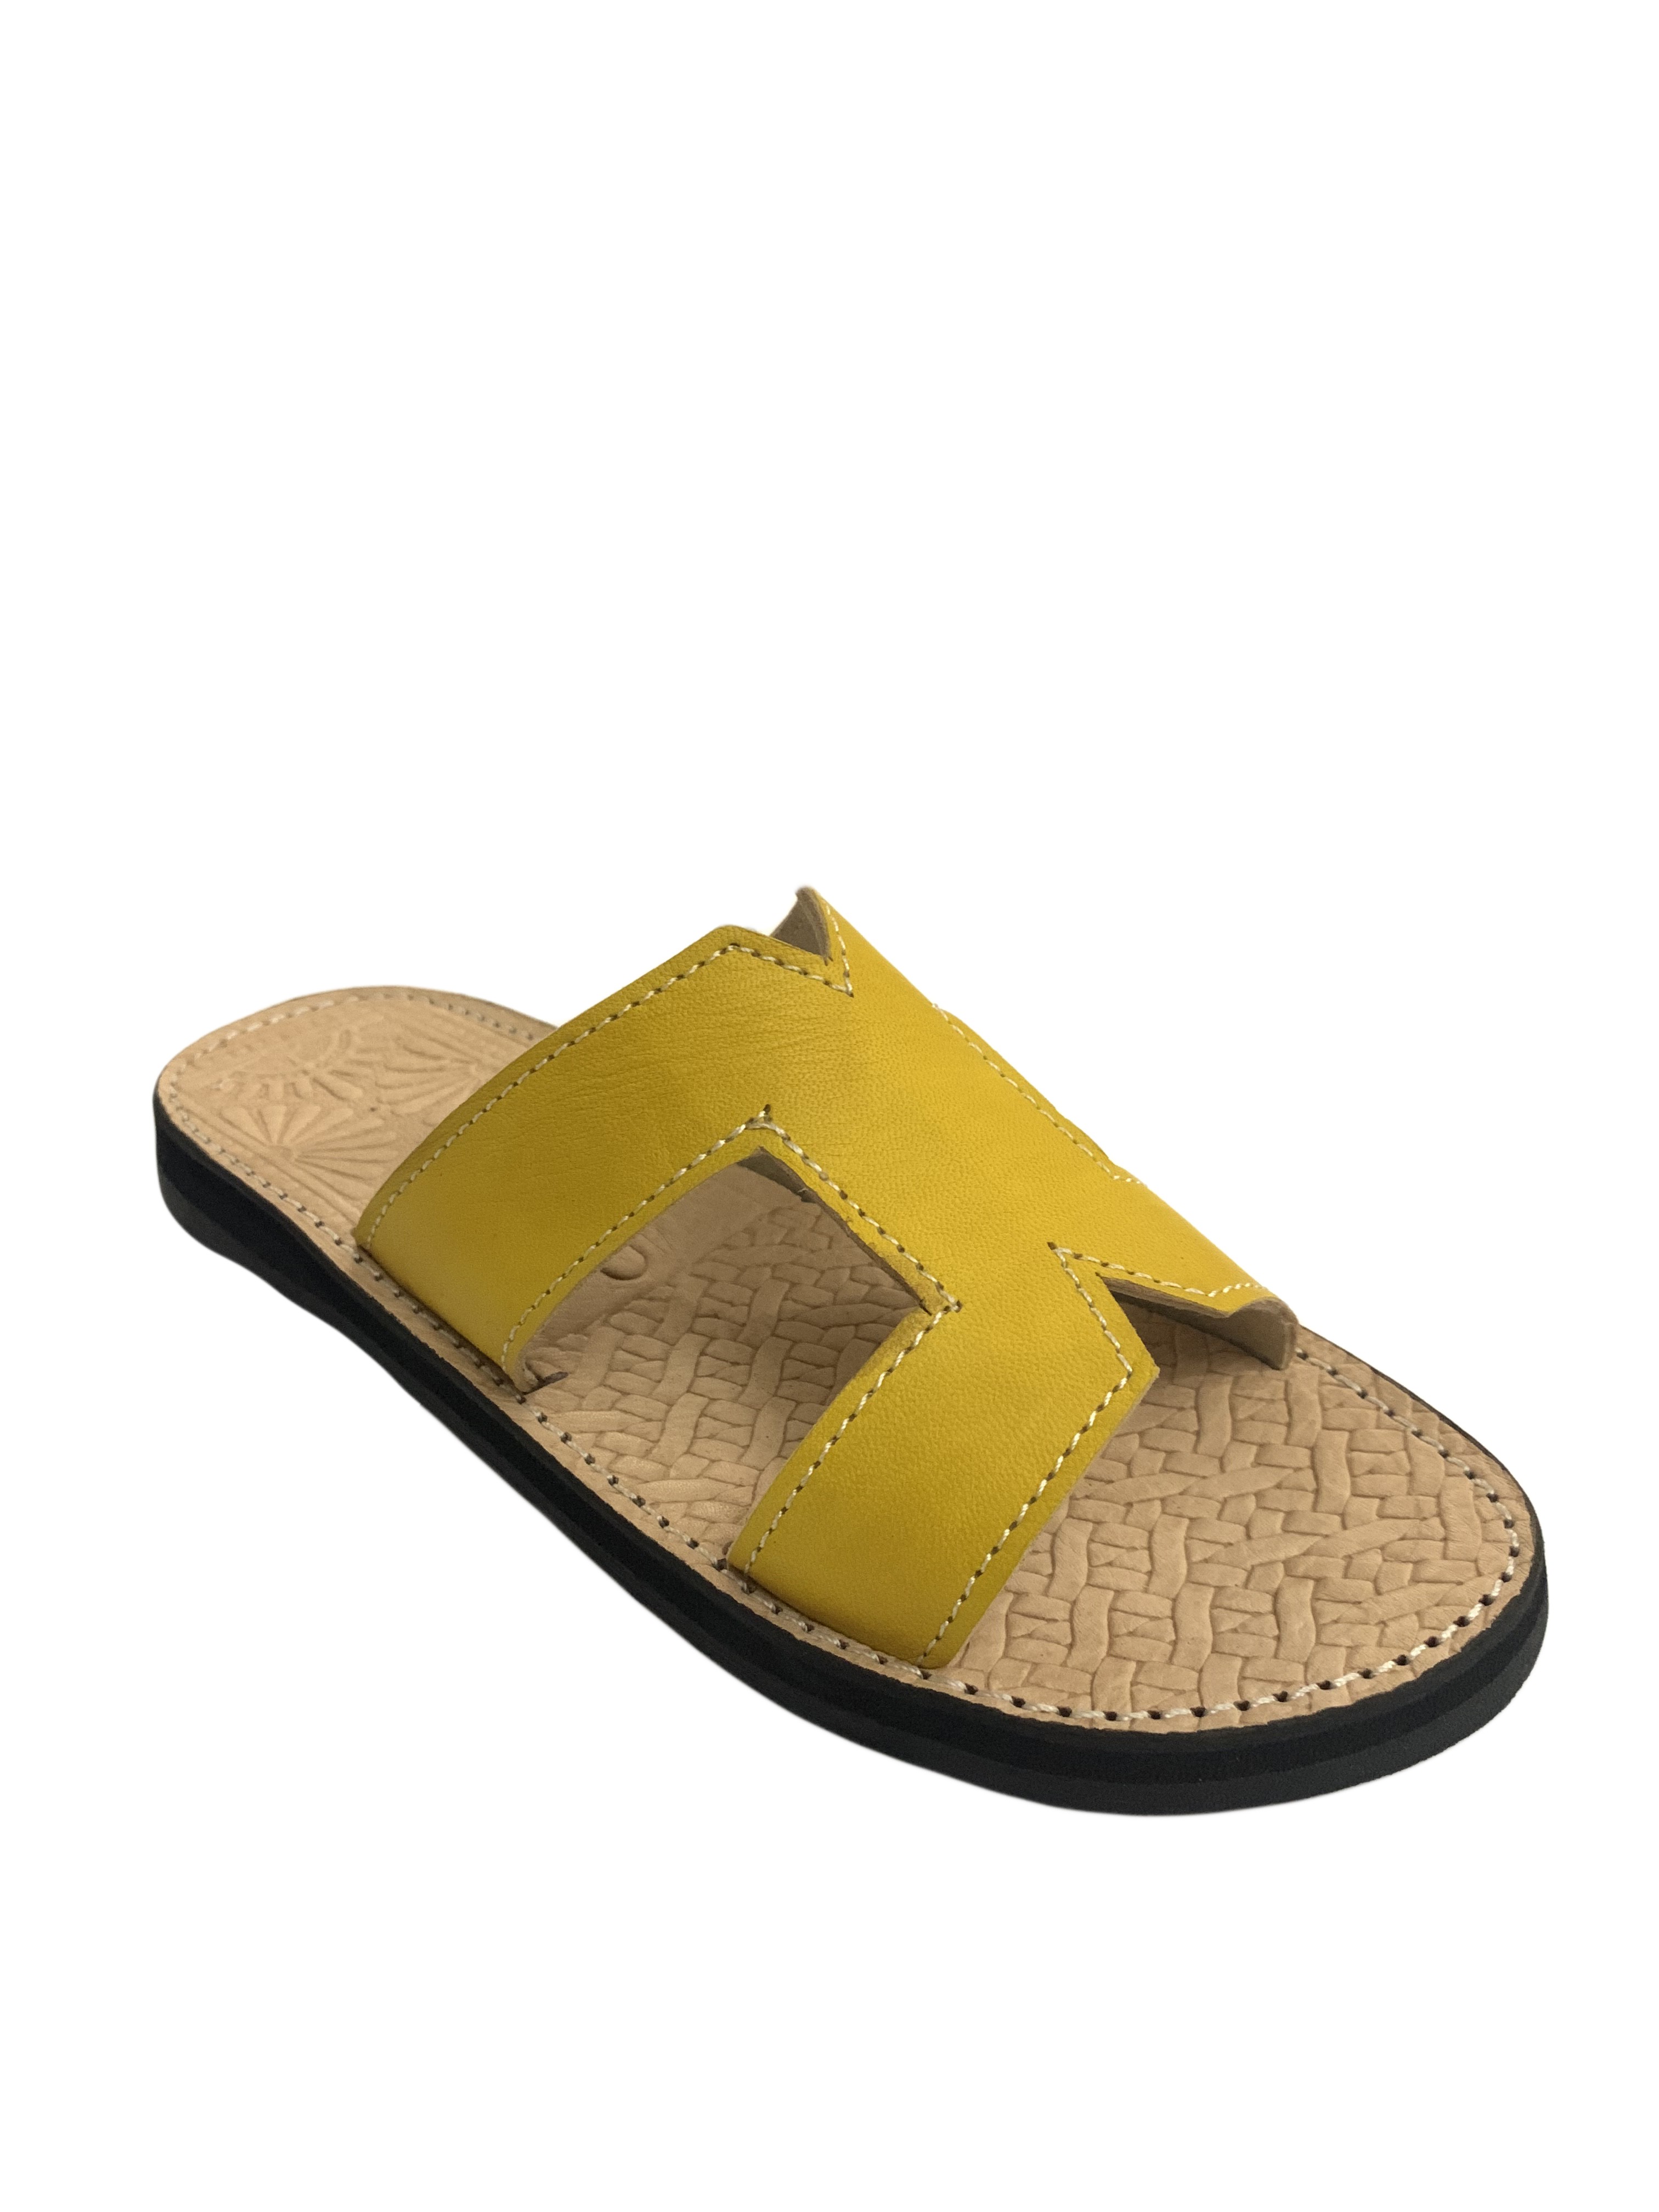 H real leather sandal for women